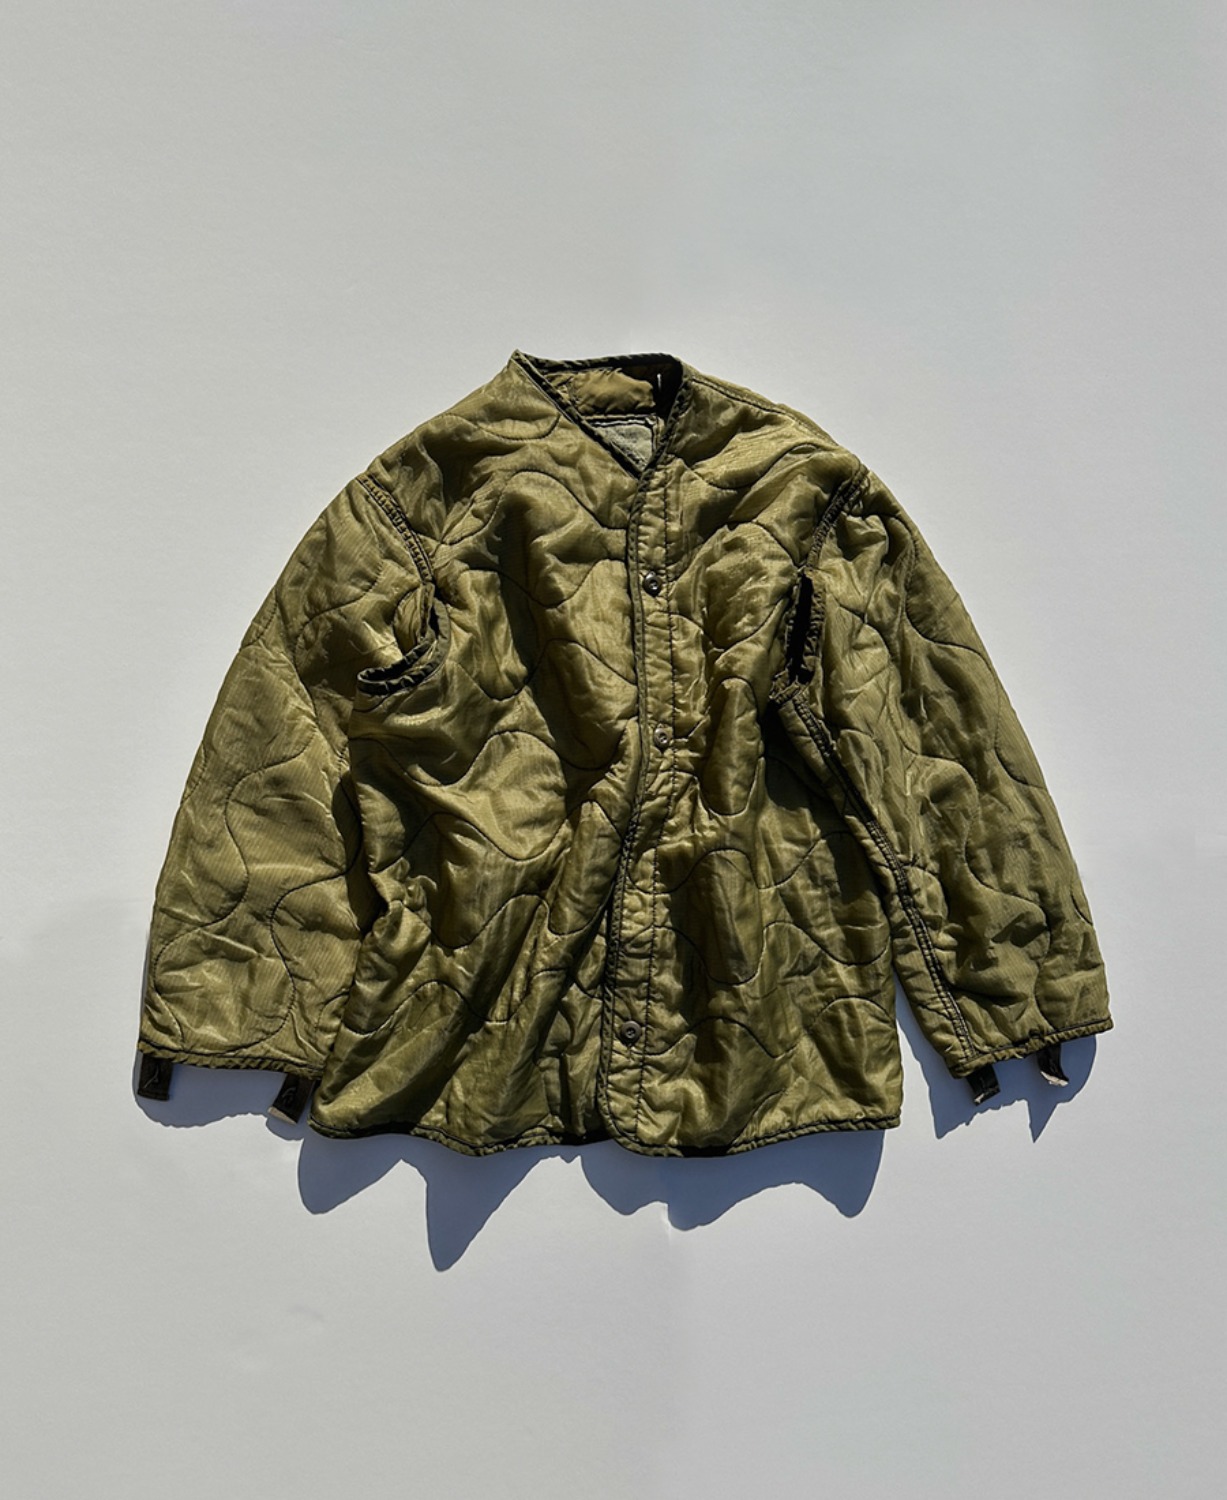 Upcycled Army Green Liner Jacket 업사이클 그린 라이너 패딩 재킷